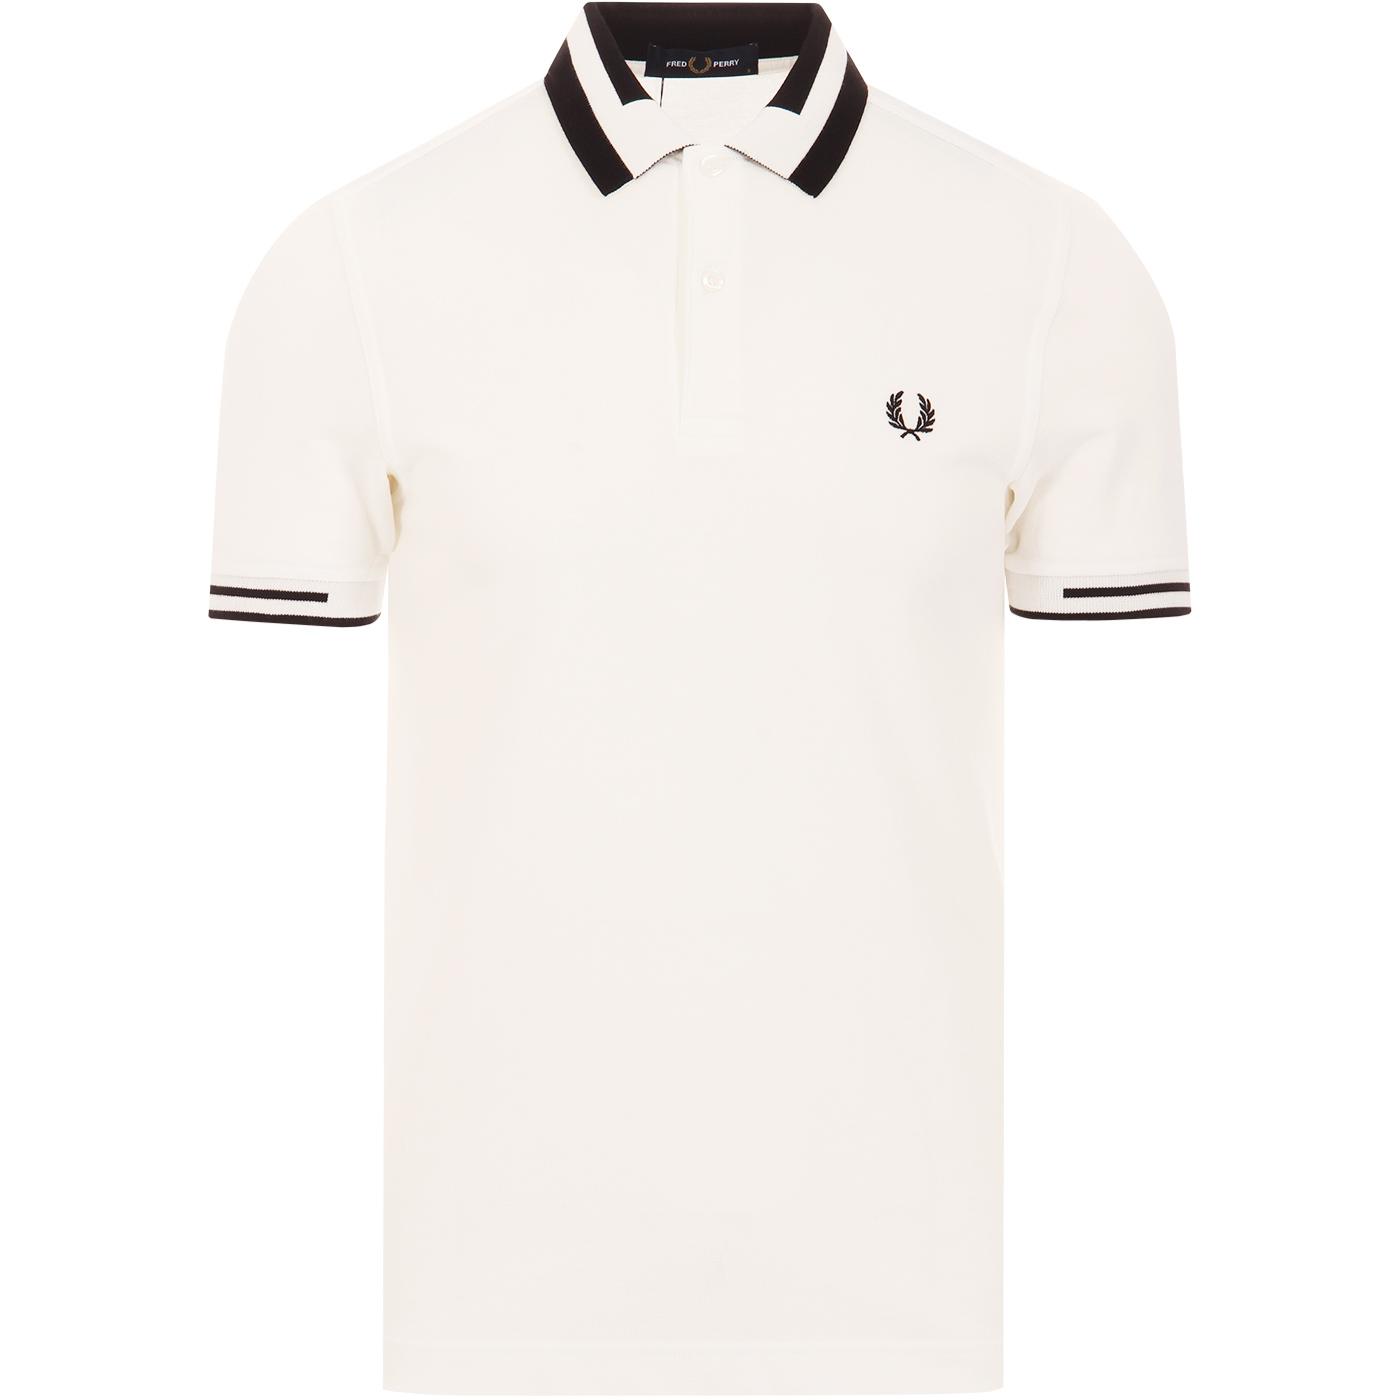 Fred Perry Mens Block Tipped Pique Shirt 